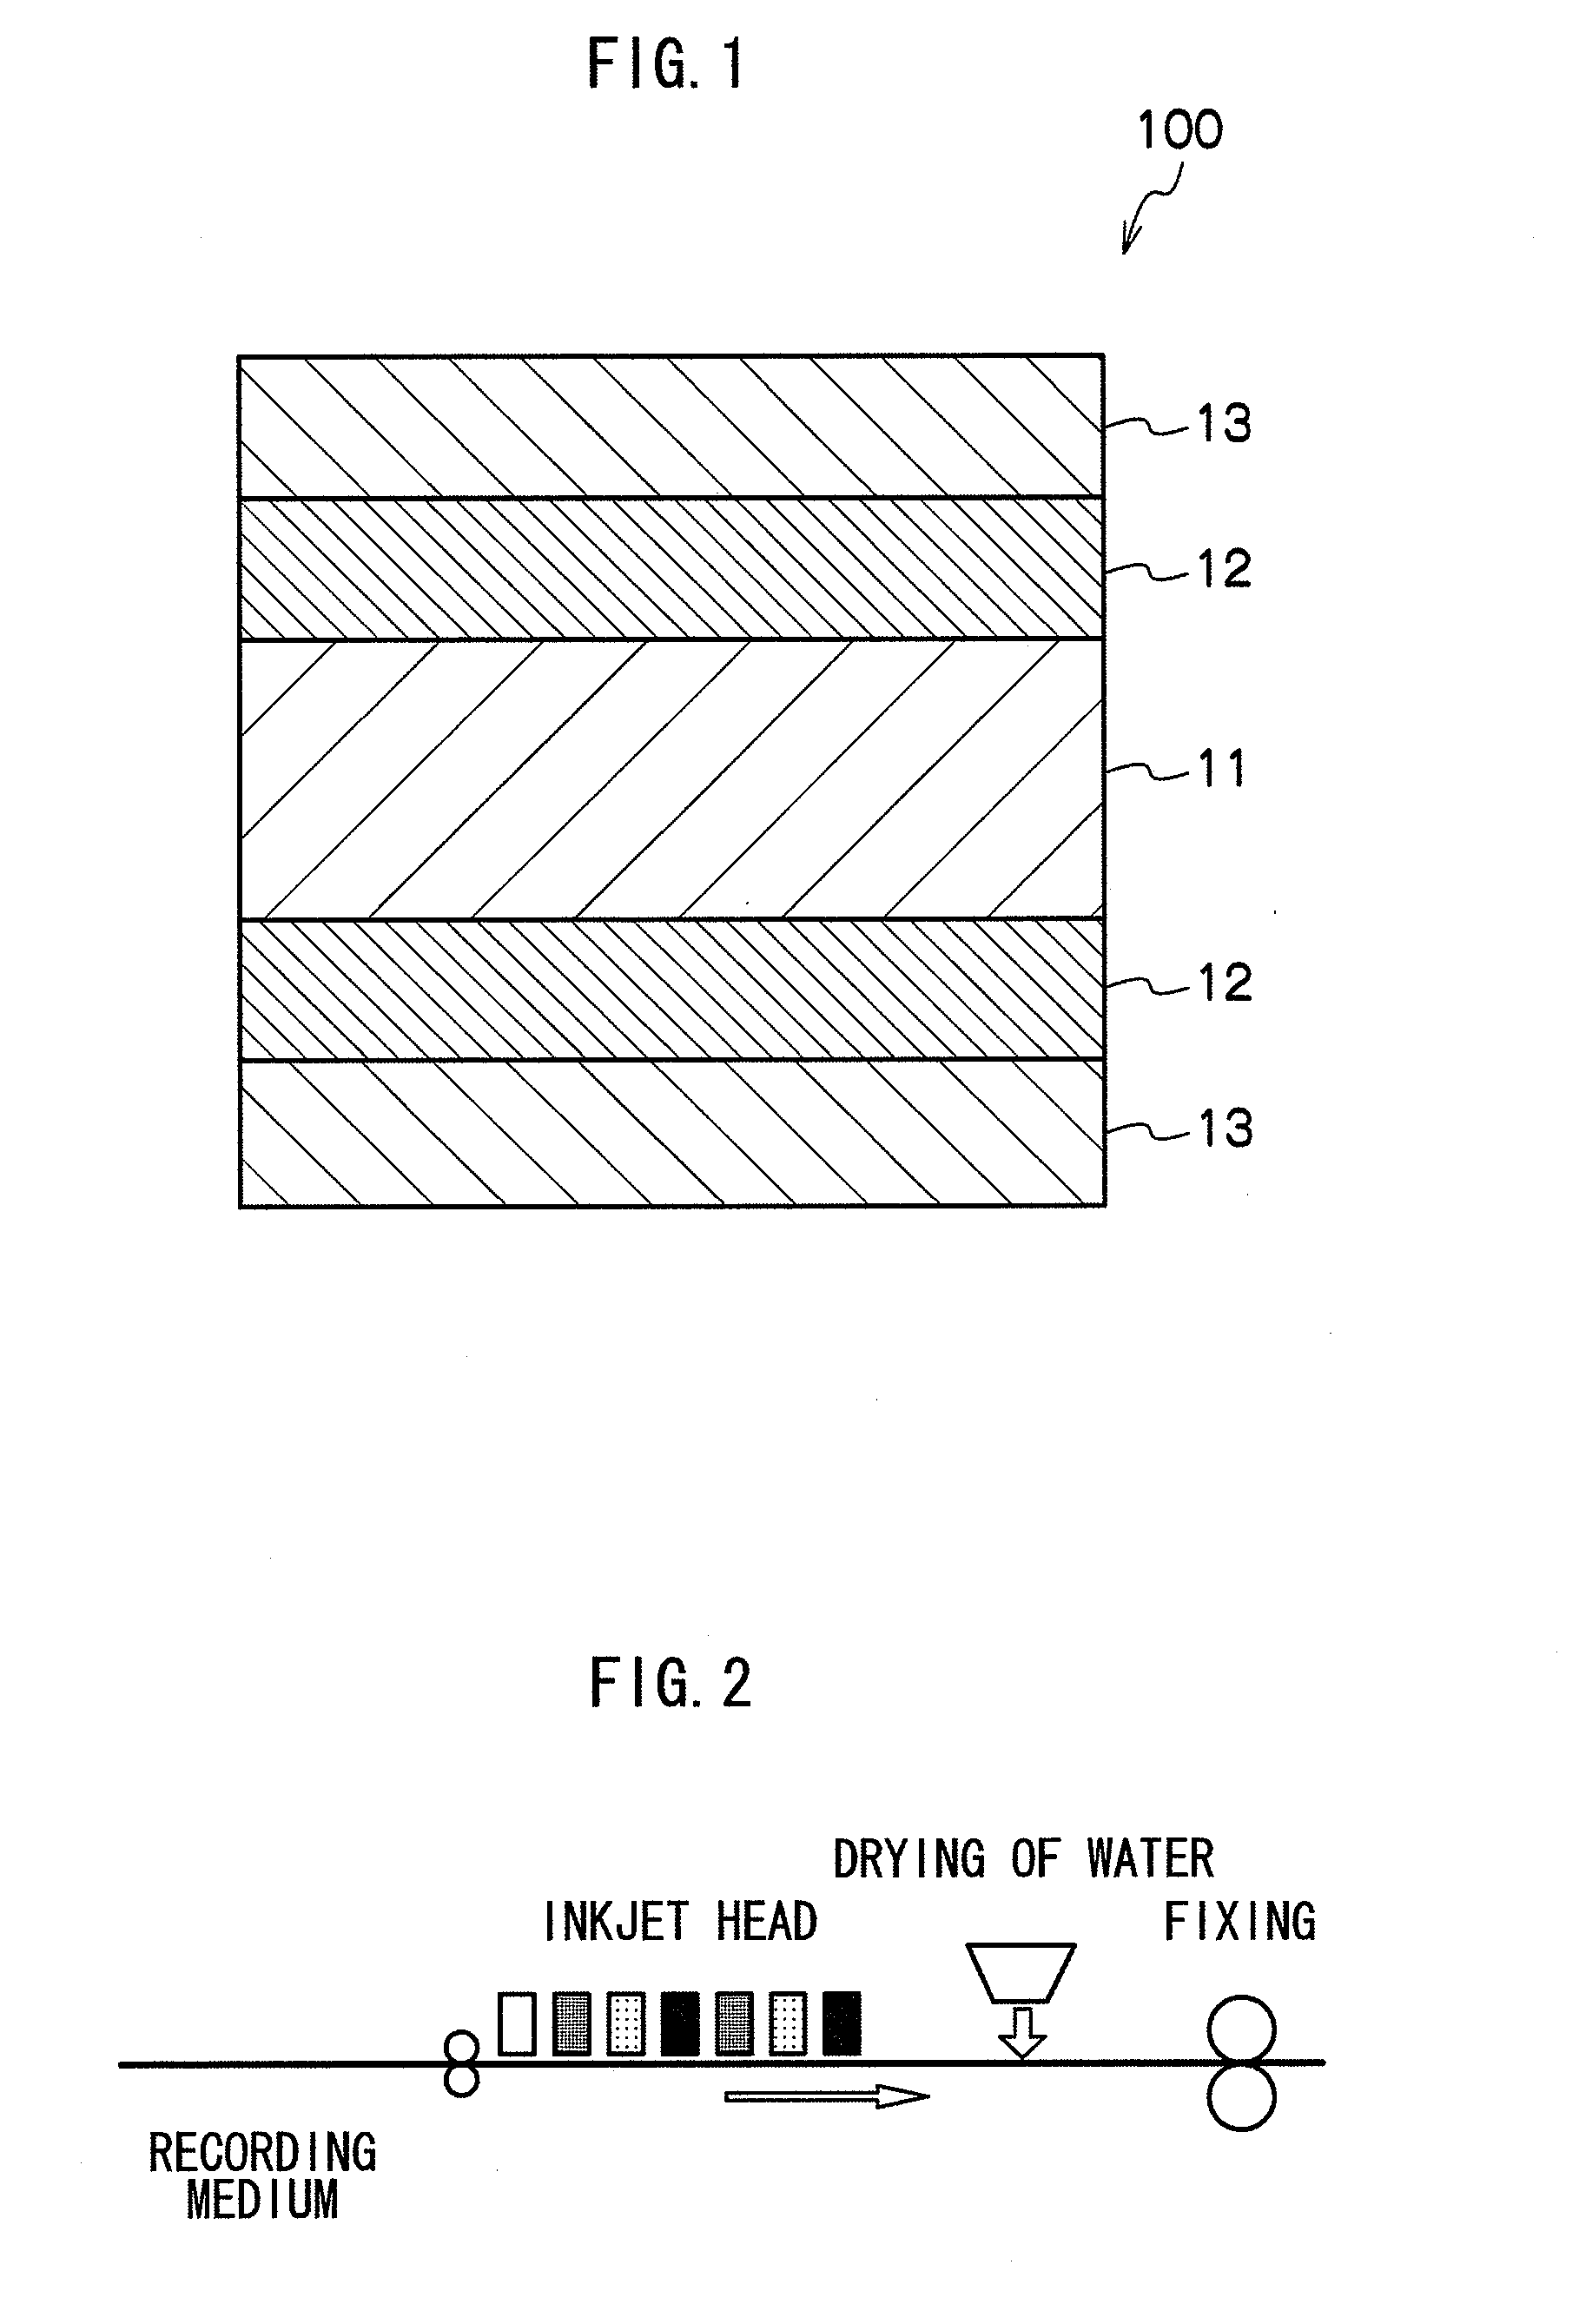 Recording medium and manufacturing method thereof, and inkjet recording method